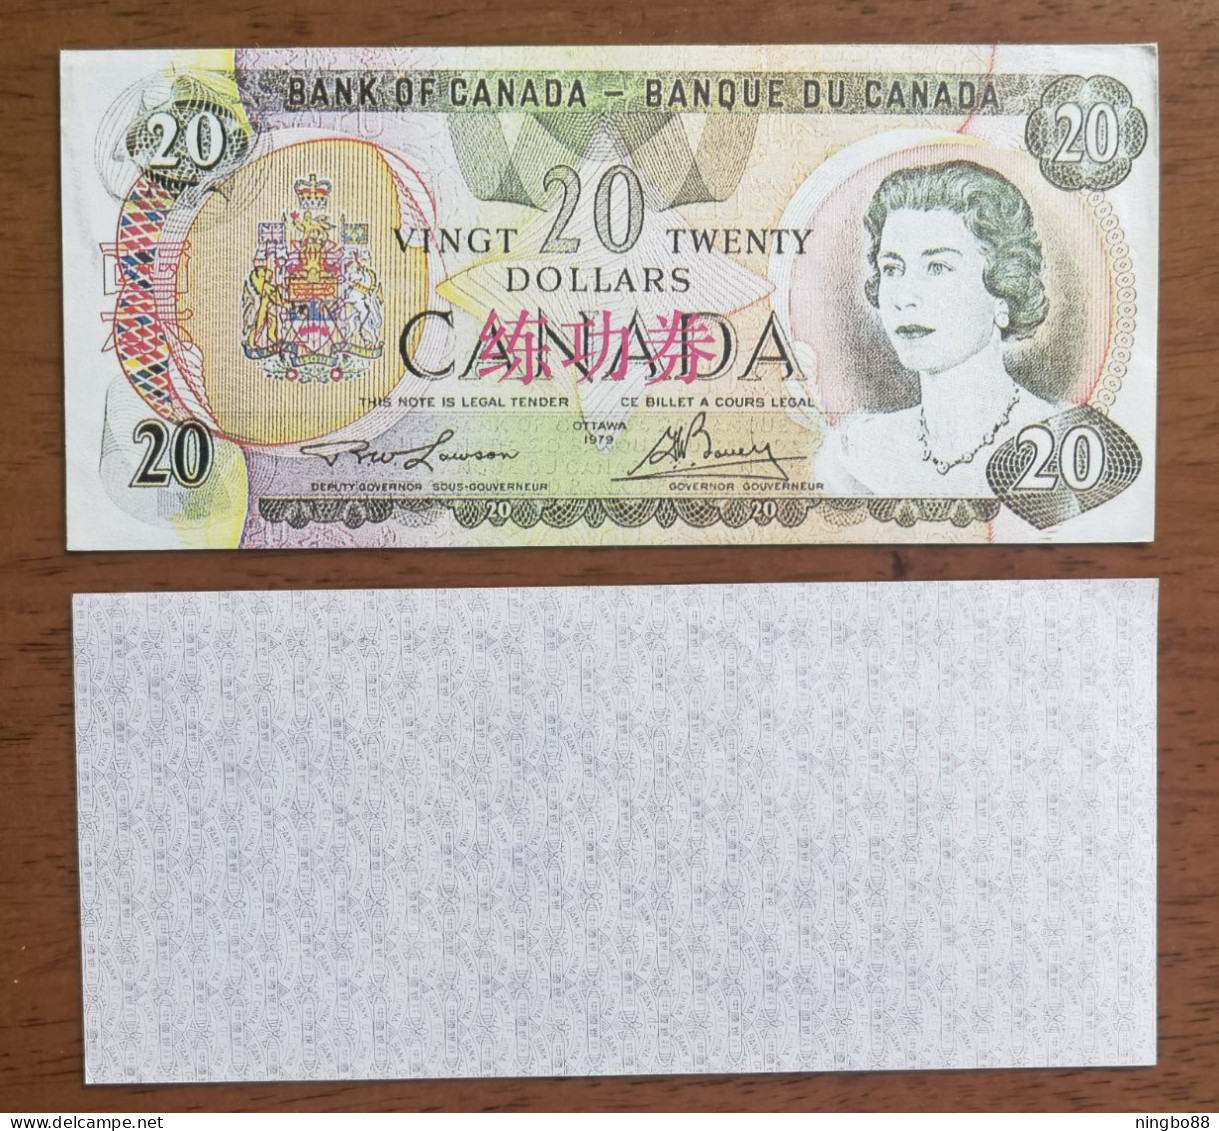 China BOC Bank (bank Of China) Training/test Banknote,Canada Dollars A Series $20 Note Specimen Overprint - Canada